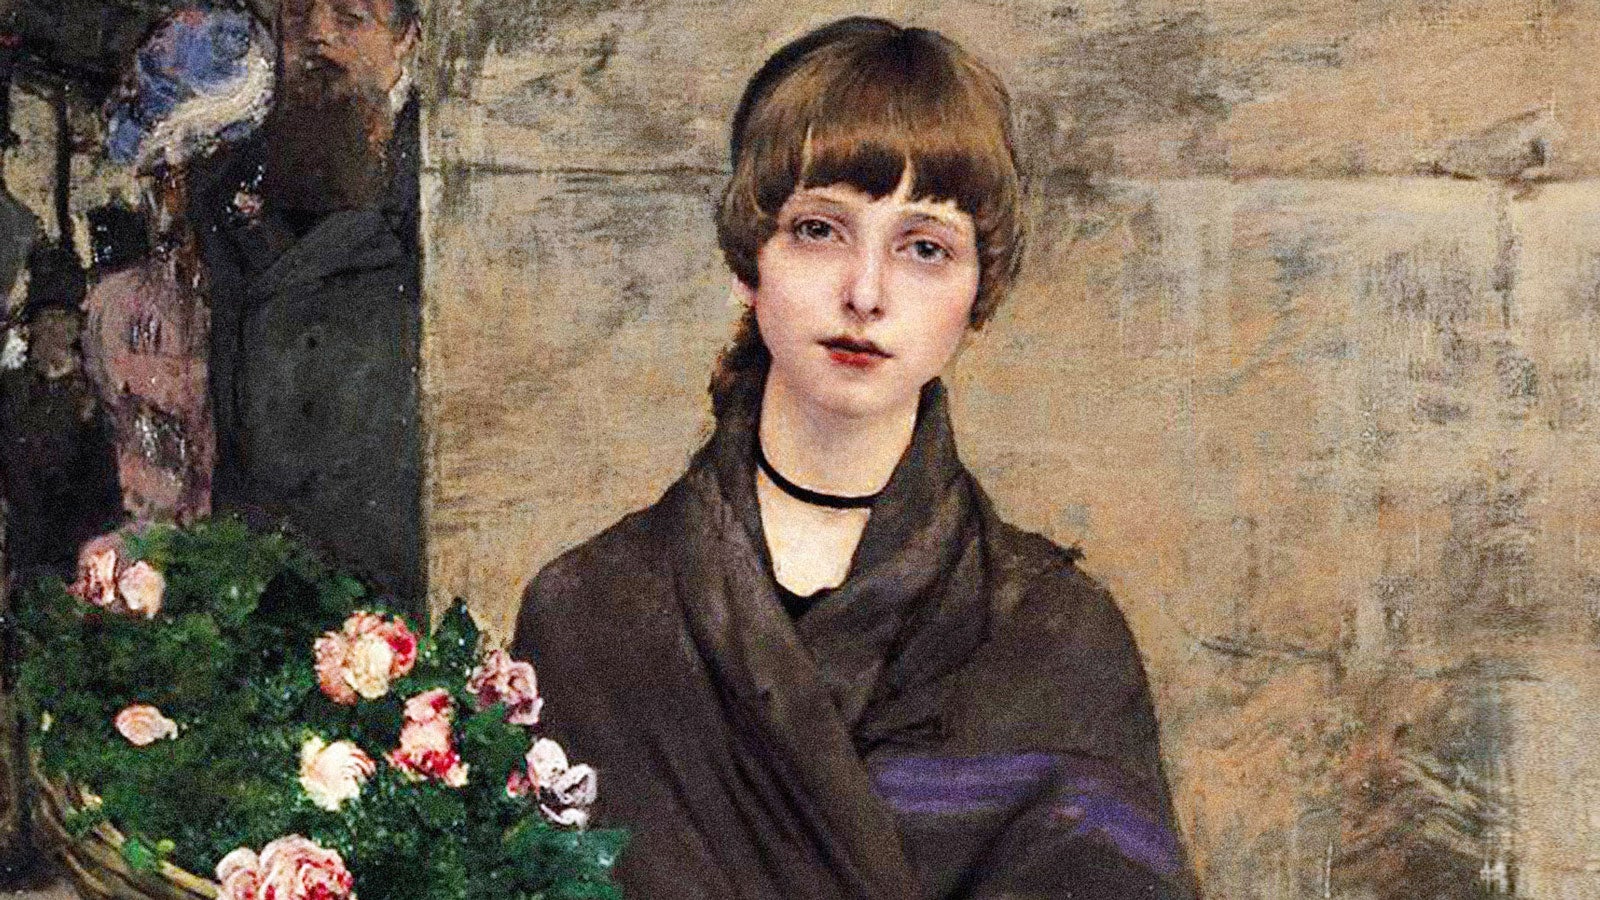 Close up of a painting showing a forlorn-looking flower girl